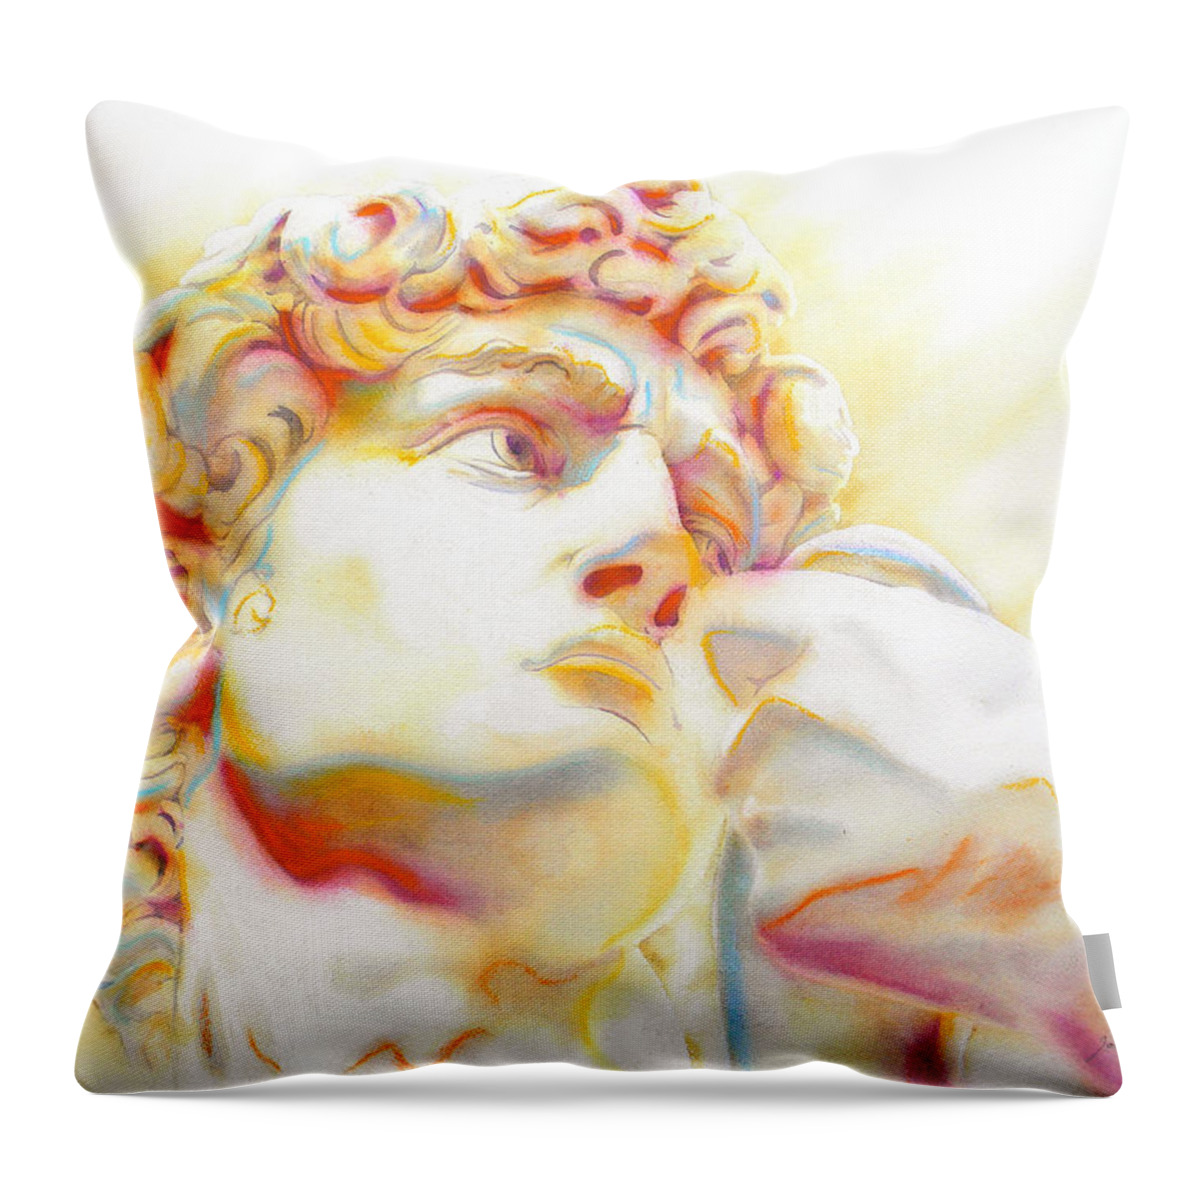 The David Art Throw Pillow featuring the painting THE DAVID by Michelangelo. Tribute by J U A N - O A X A C A